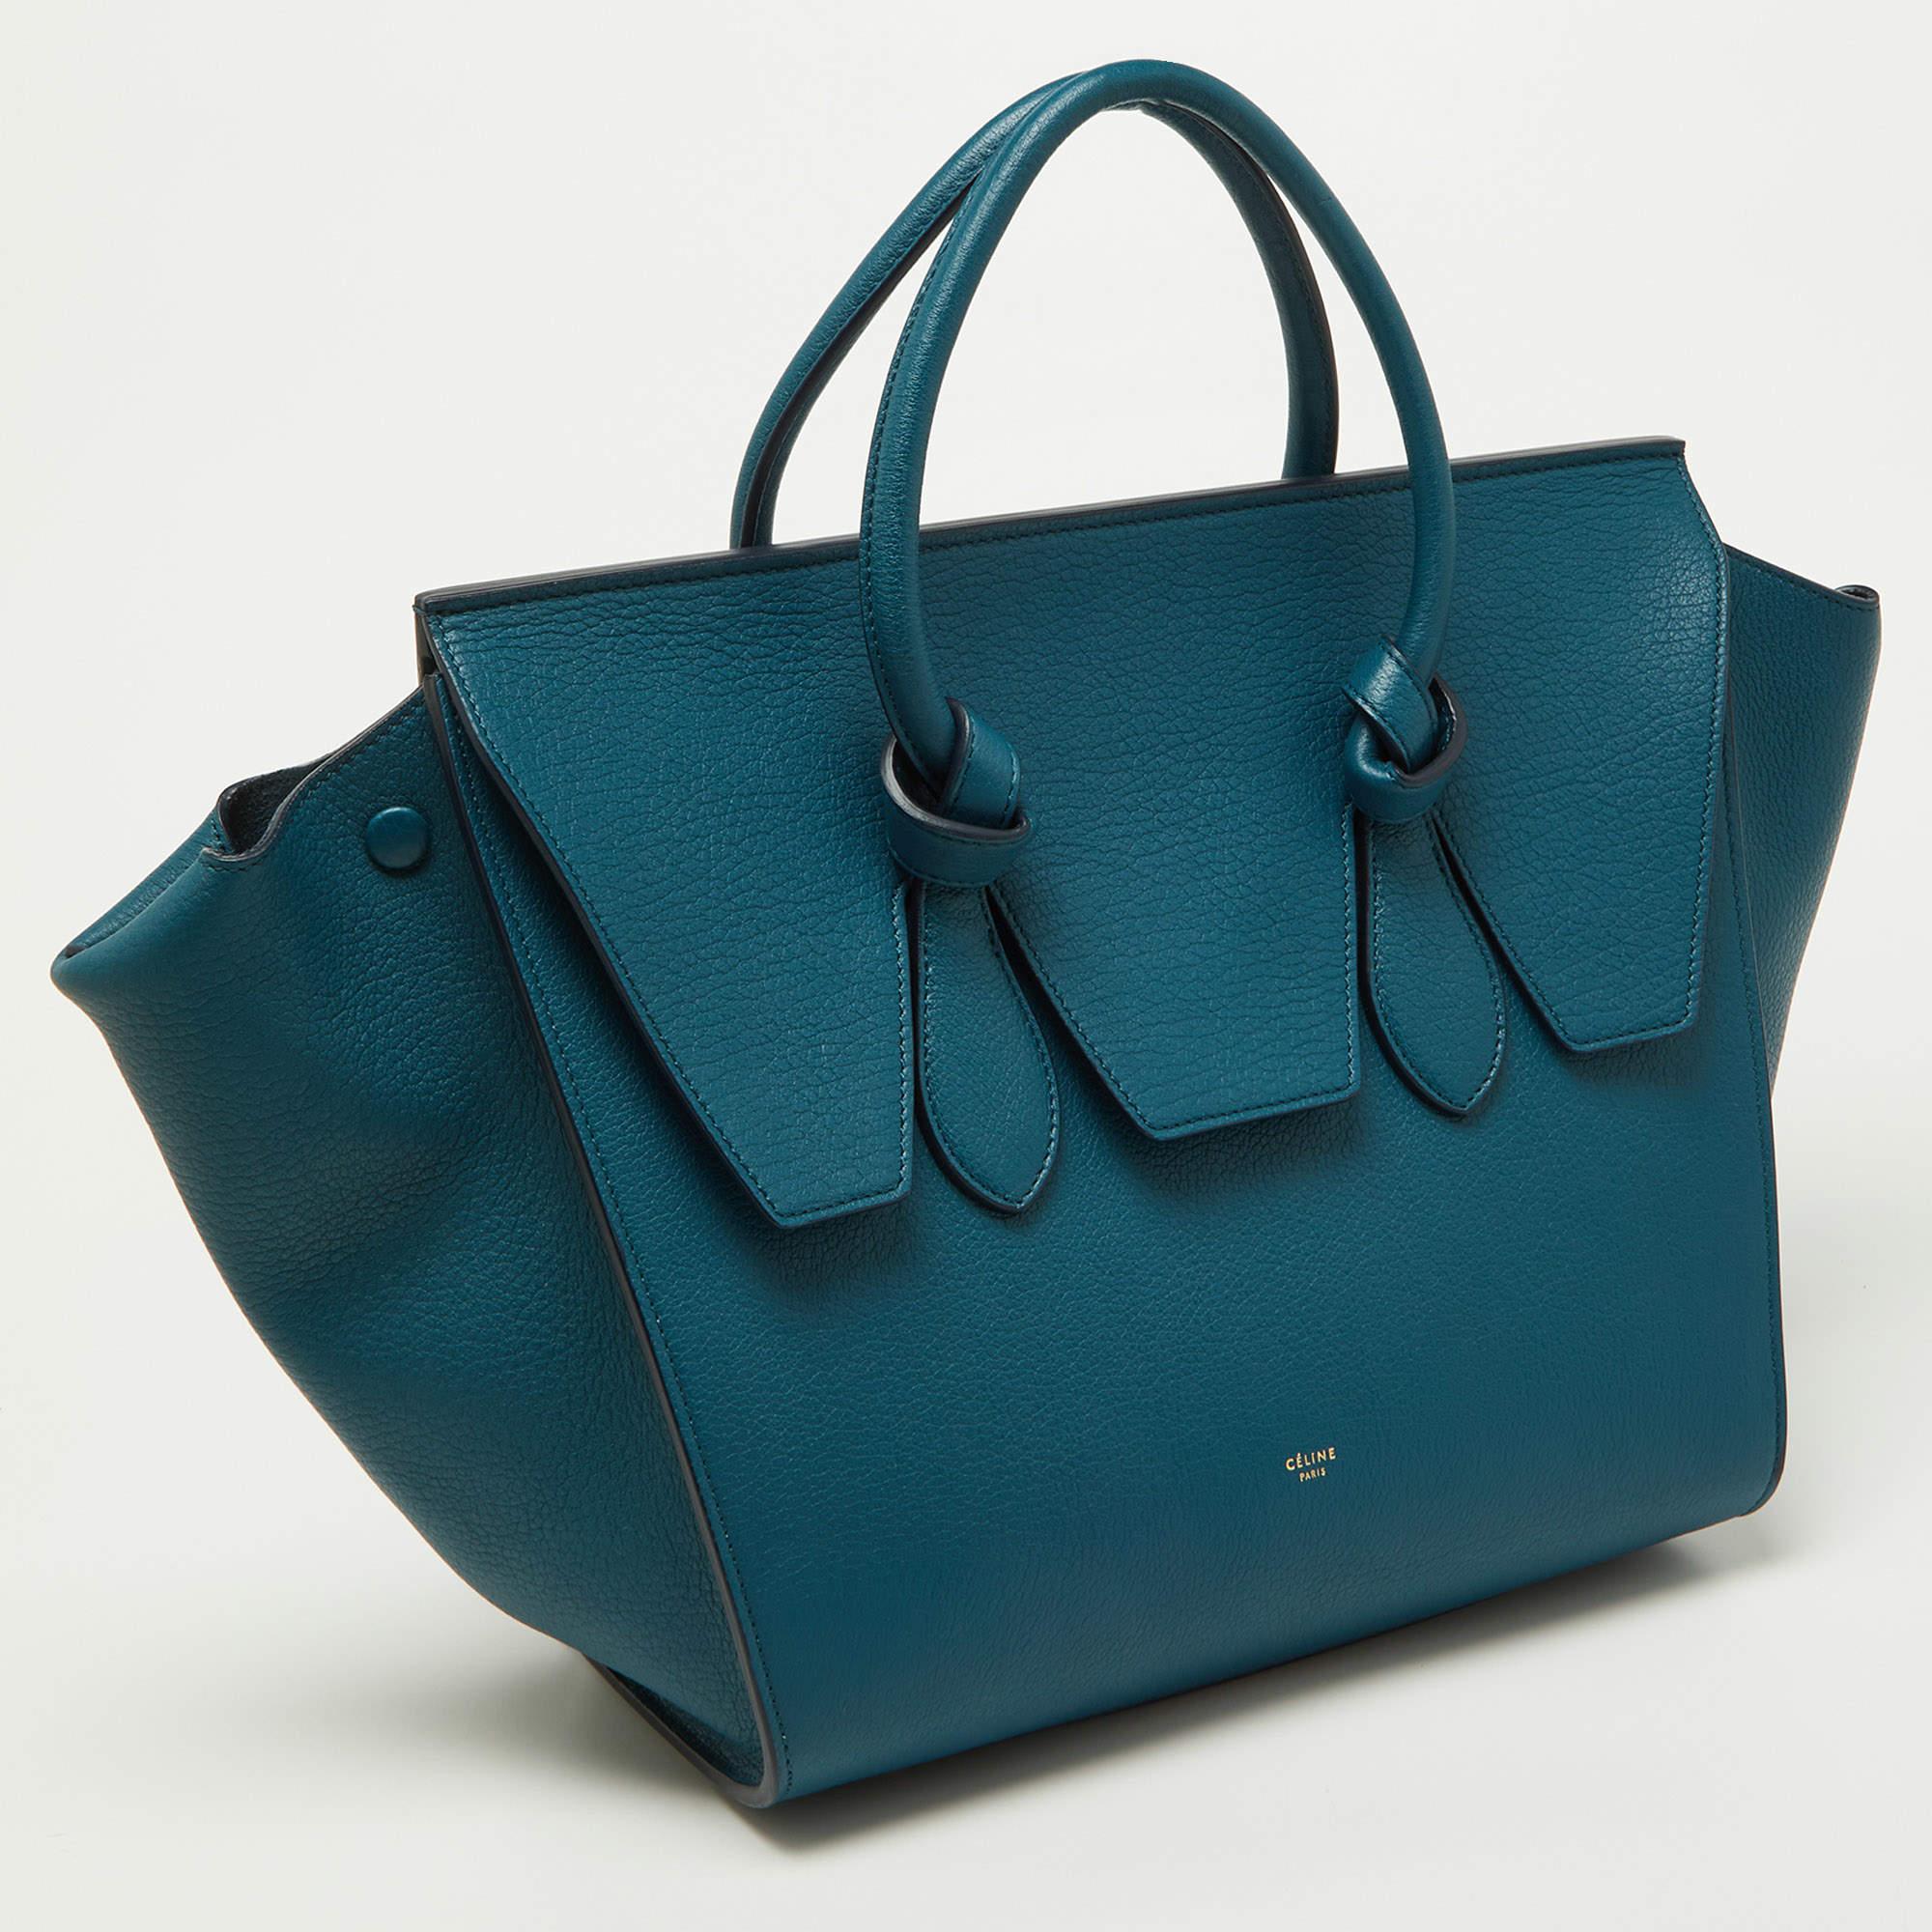 Celine Teal Blue Leather Small Tie Tote For Sale 5